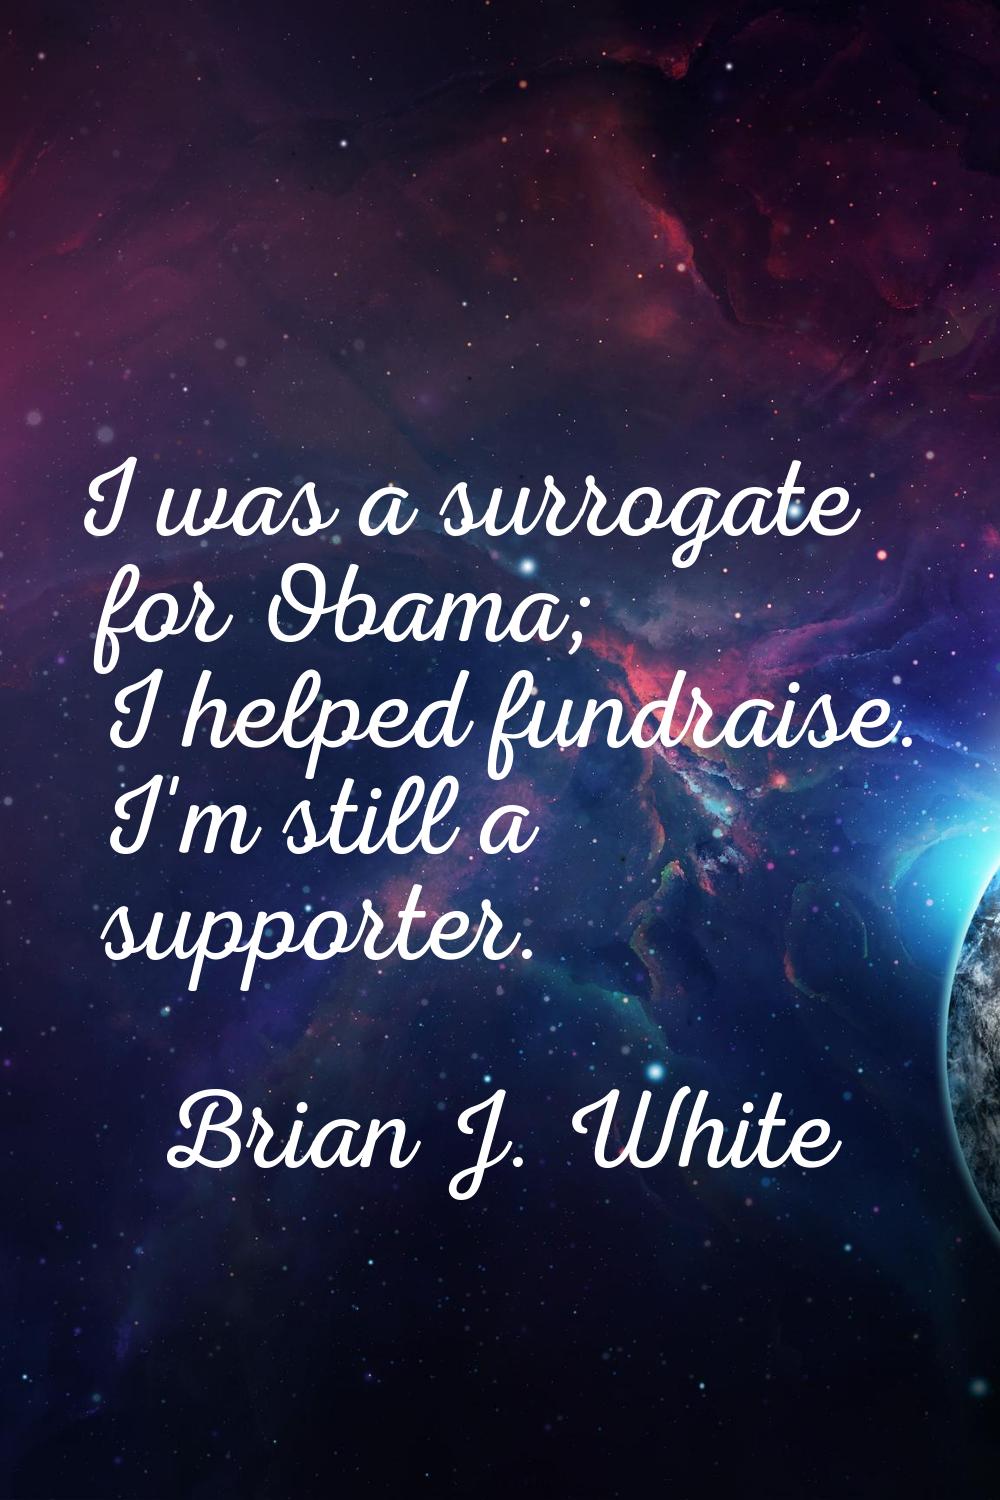 I was a surrogate for Obama; I helped fundraise. I'm still a supporter.